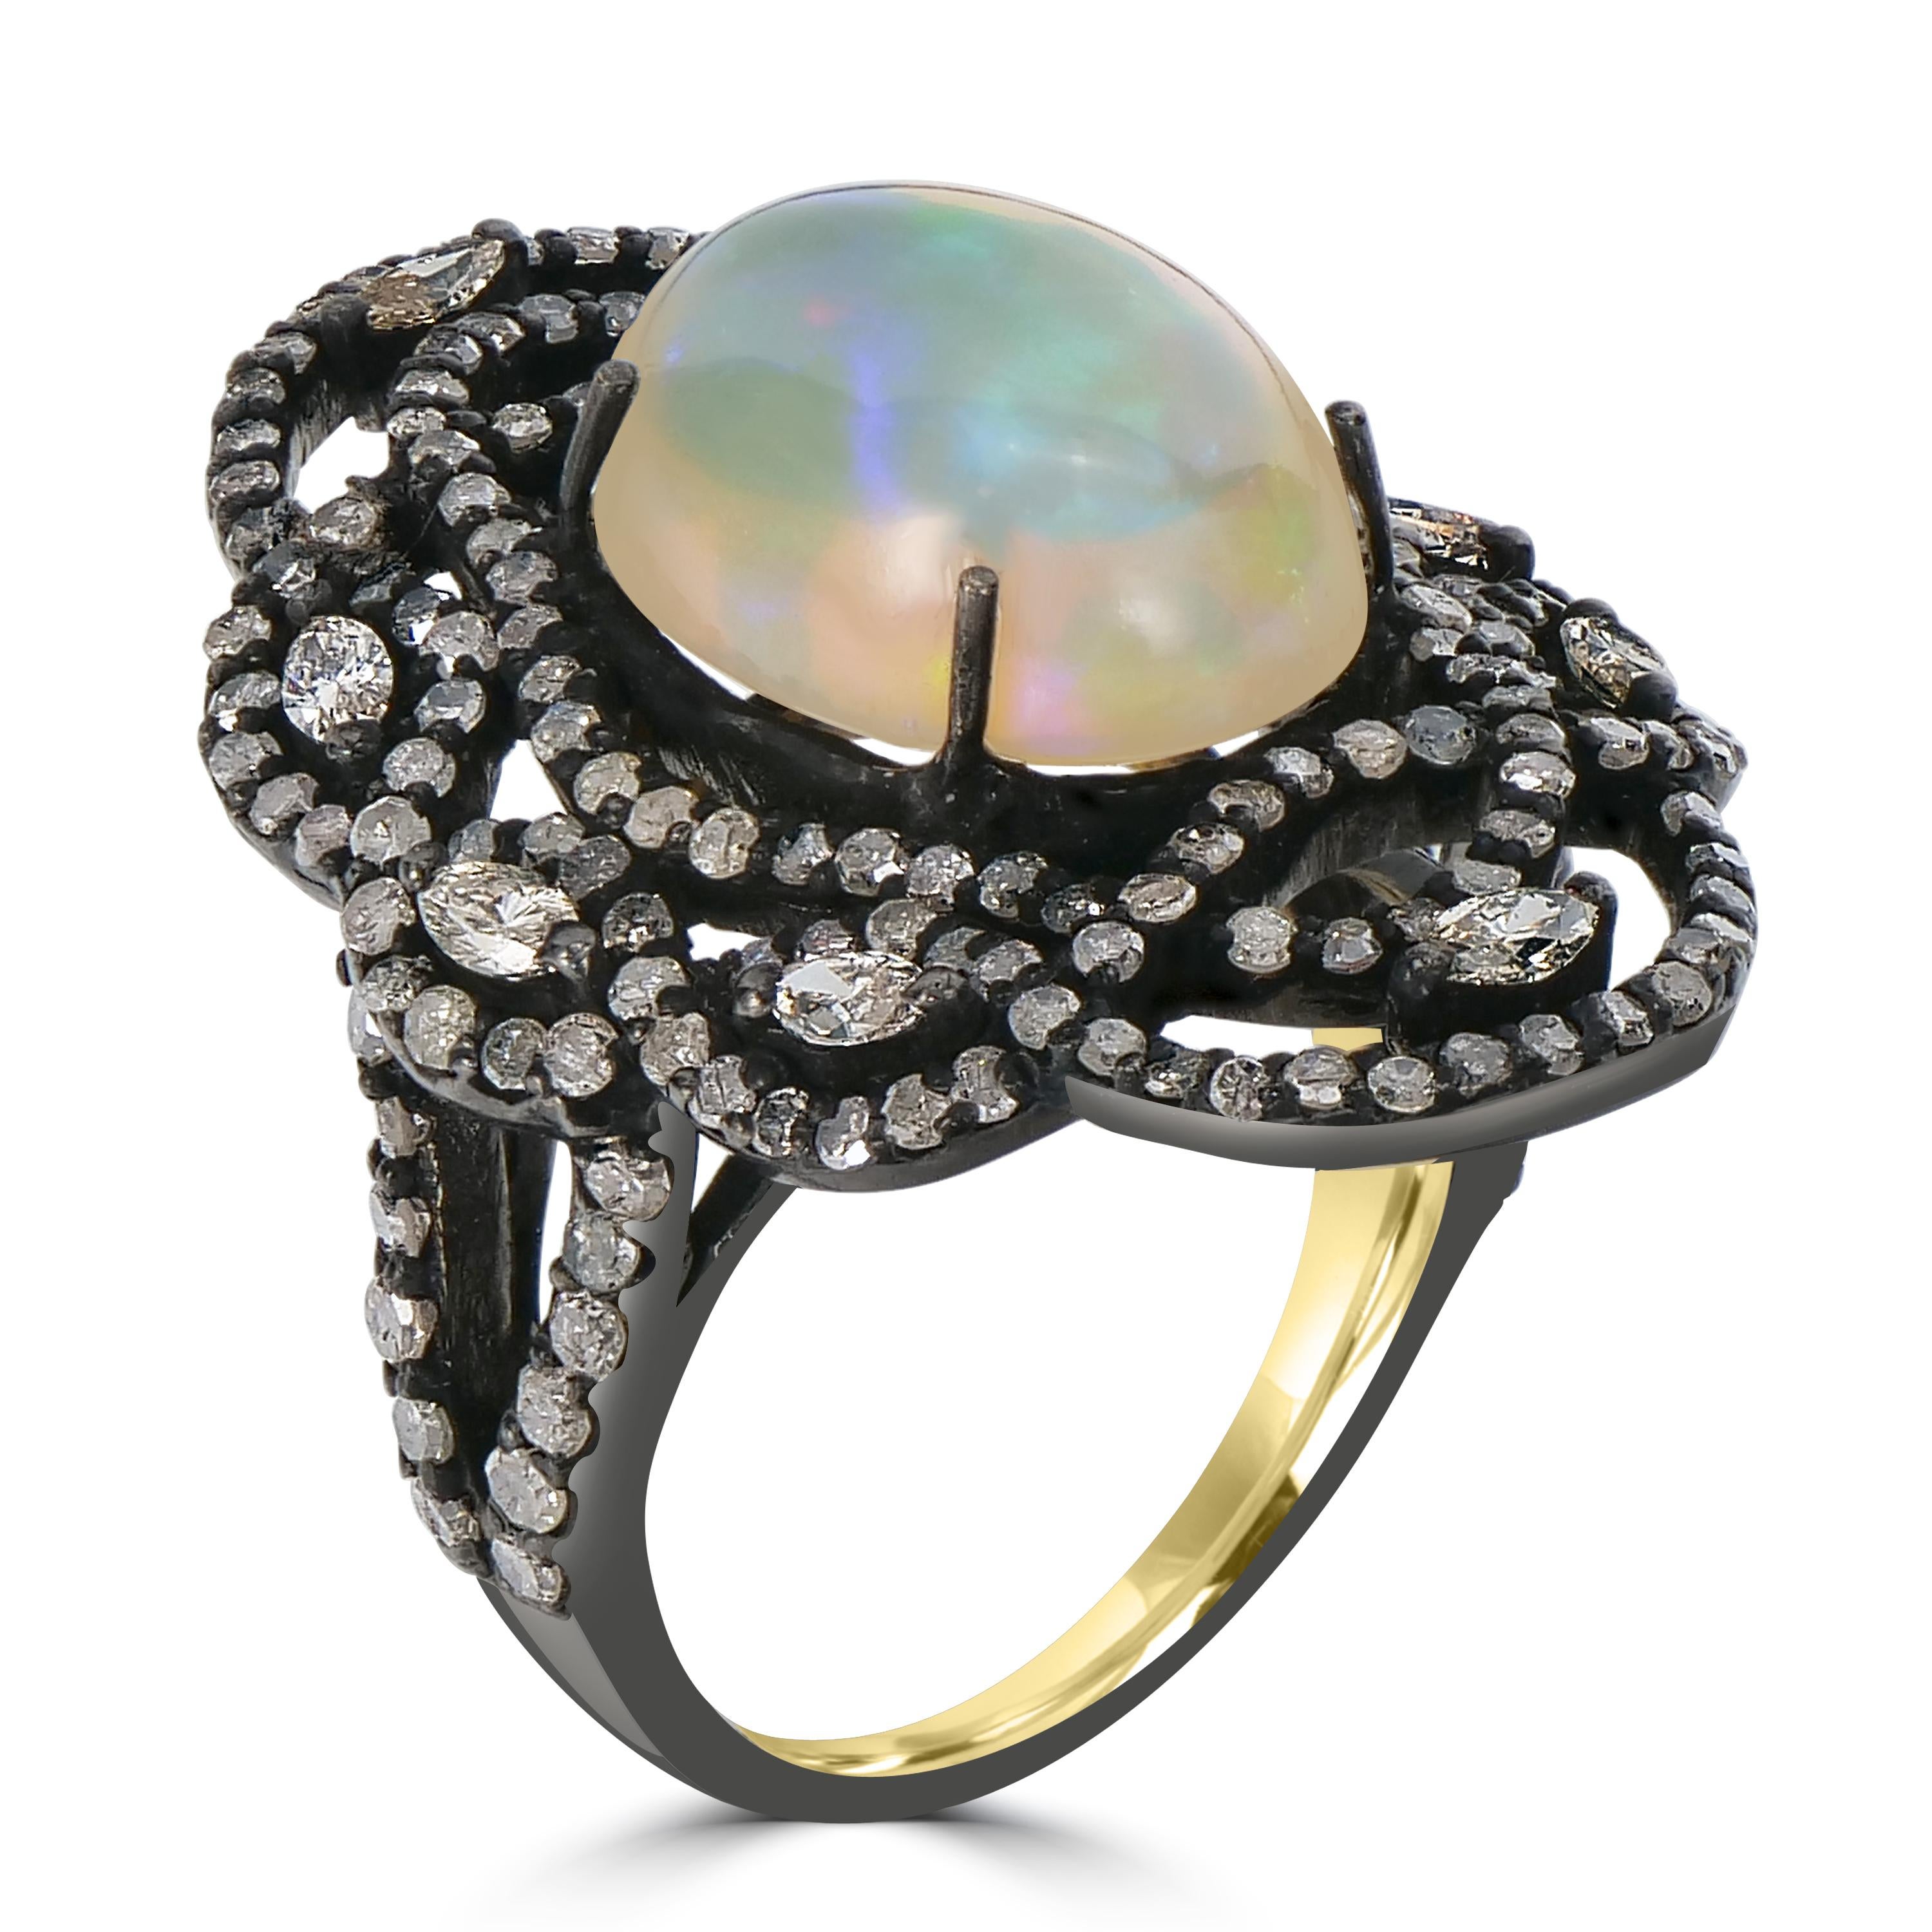 Introducing the captivating Victorian 9 Cttw. Ethiopian Opal and Diamond Cocktail Ring, a testament to timeless elegance and artisanal craftsmanship. This exquisite ring is more than a piece of jewelry; it's a wearable work of art.

At the heart of